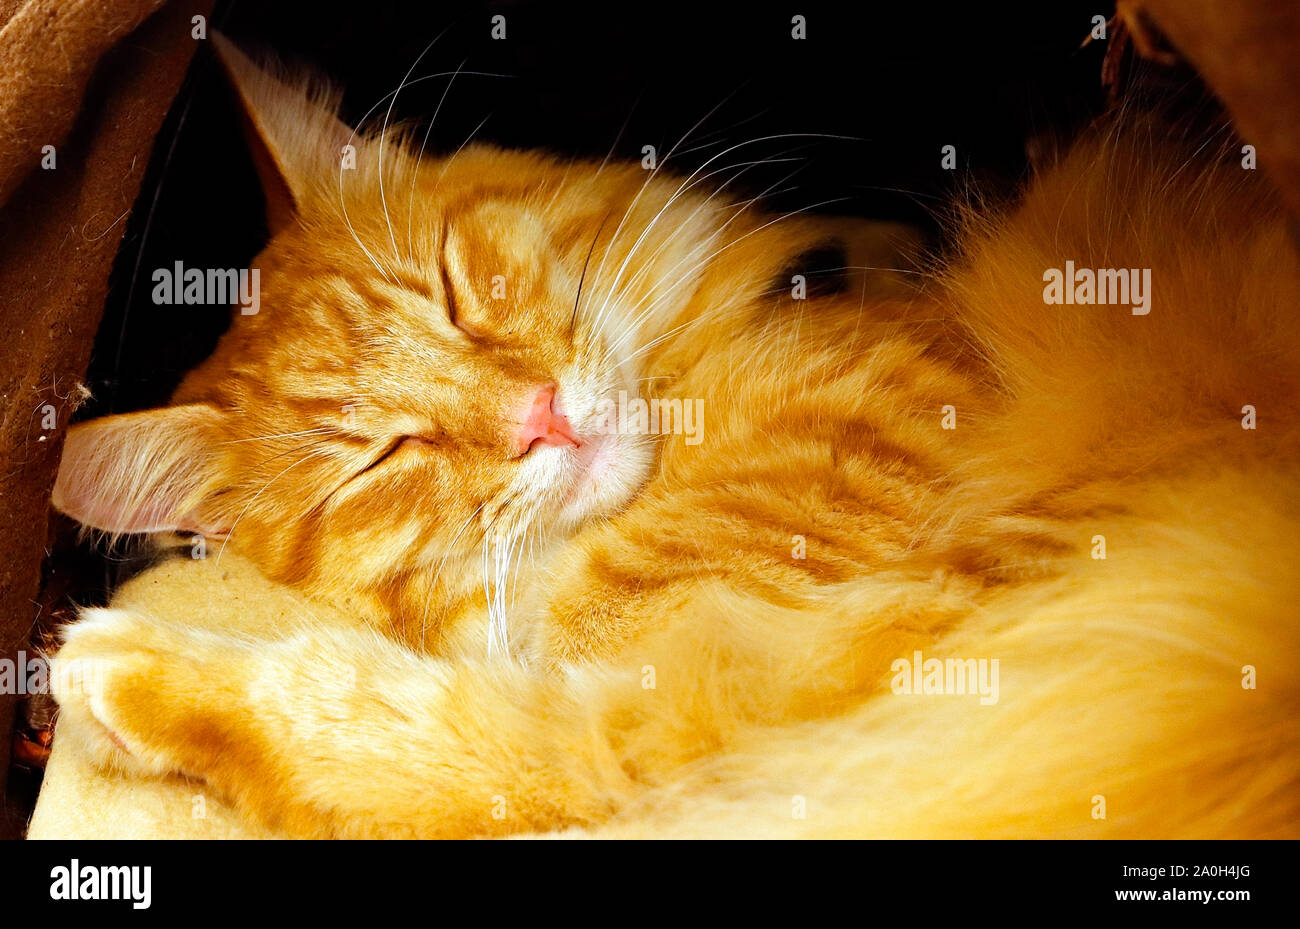 Paddington, the long haired ginger cat, asleep in his den. Stock Photo